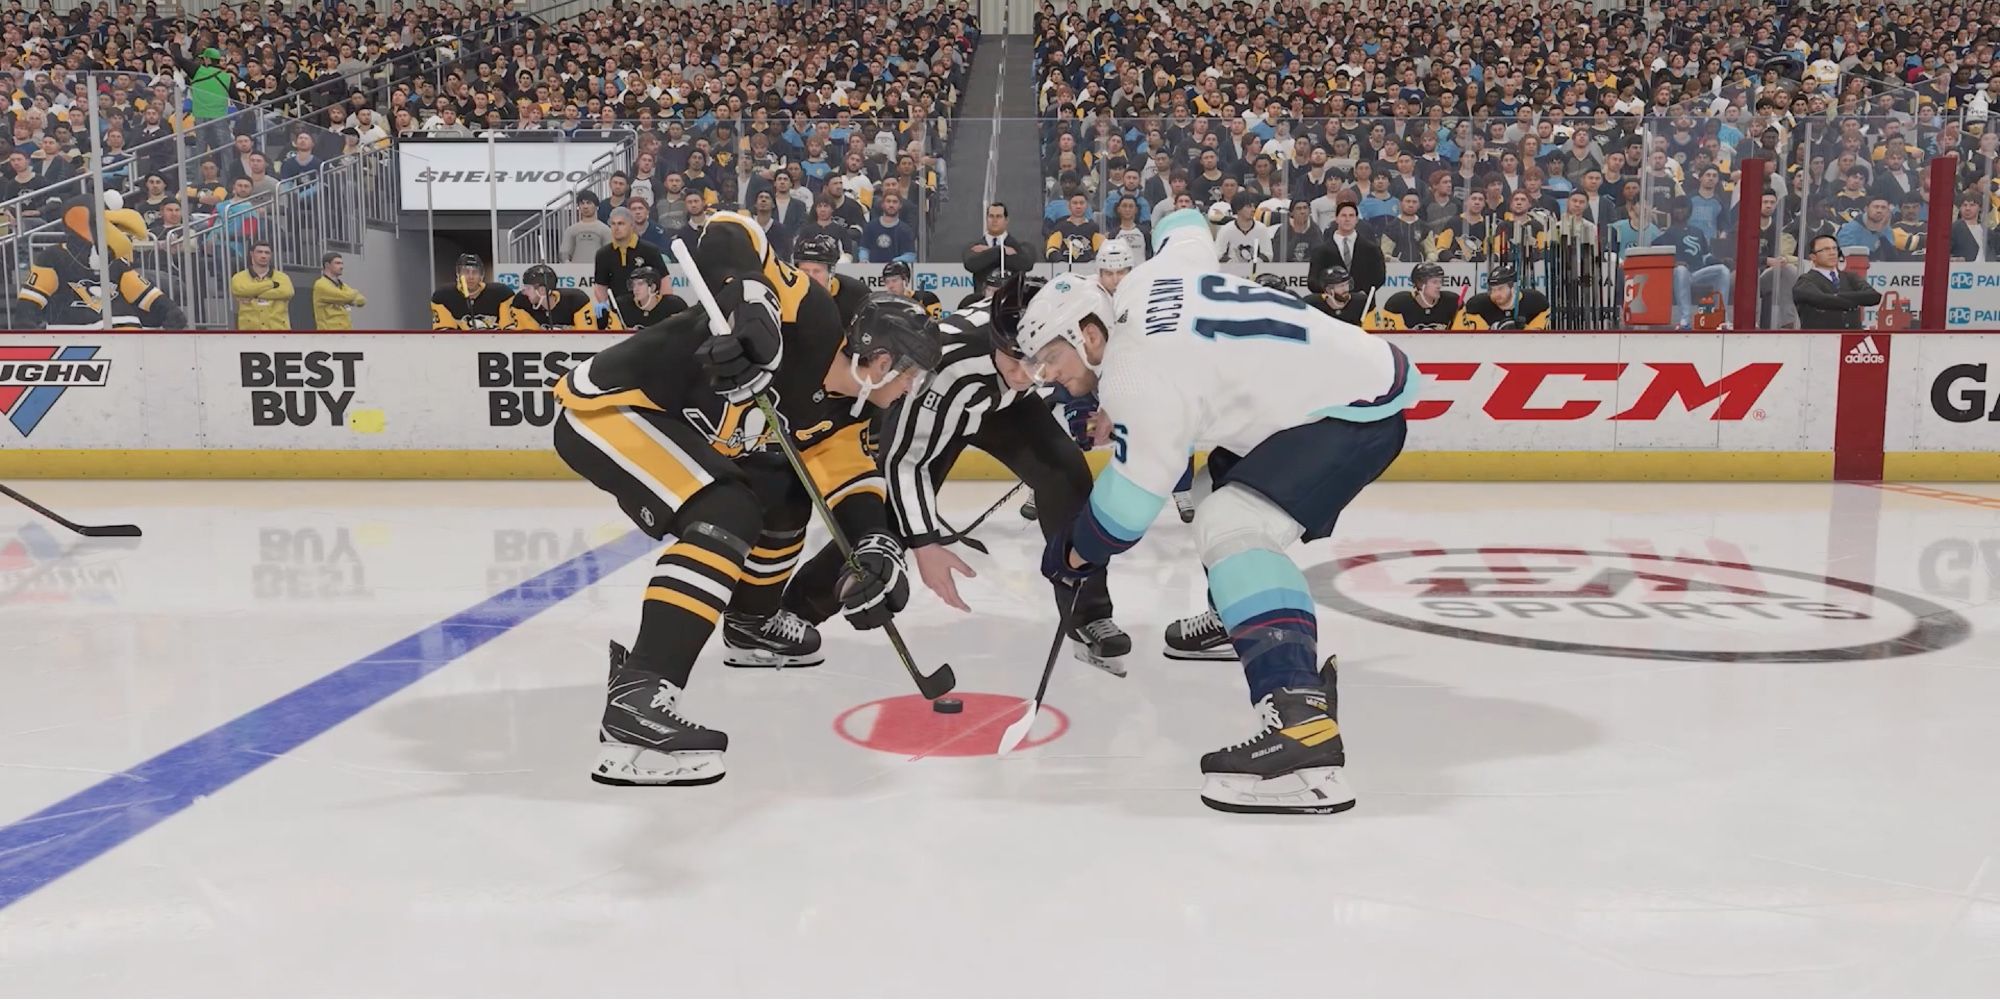 NHL 22 - Player uses Forehand to counter opponent during Face-off